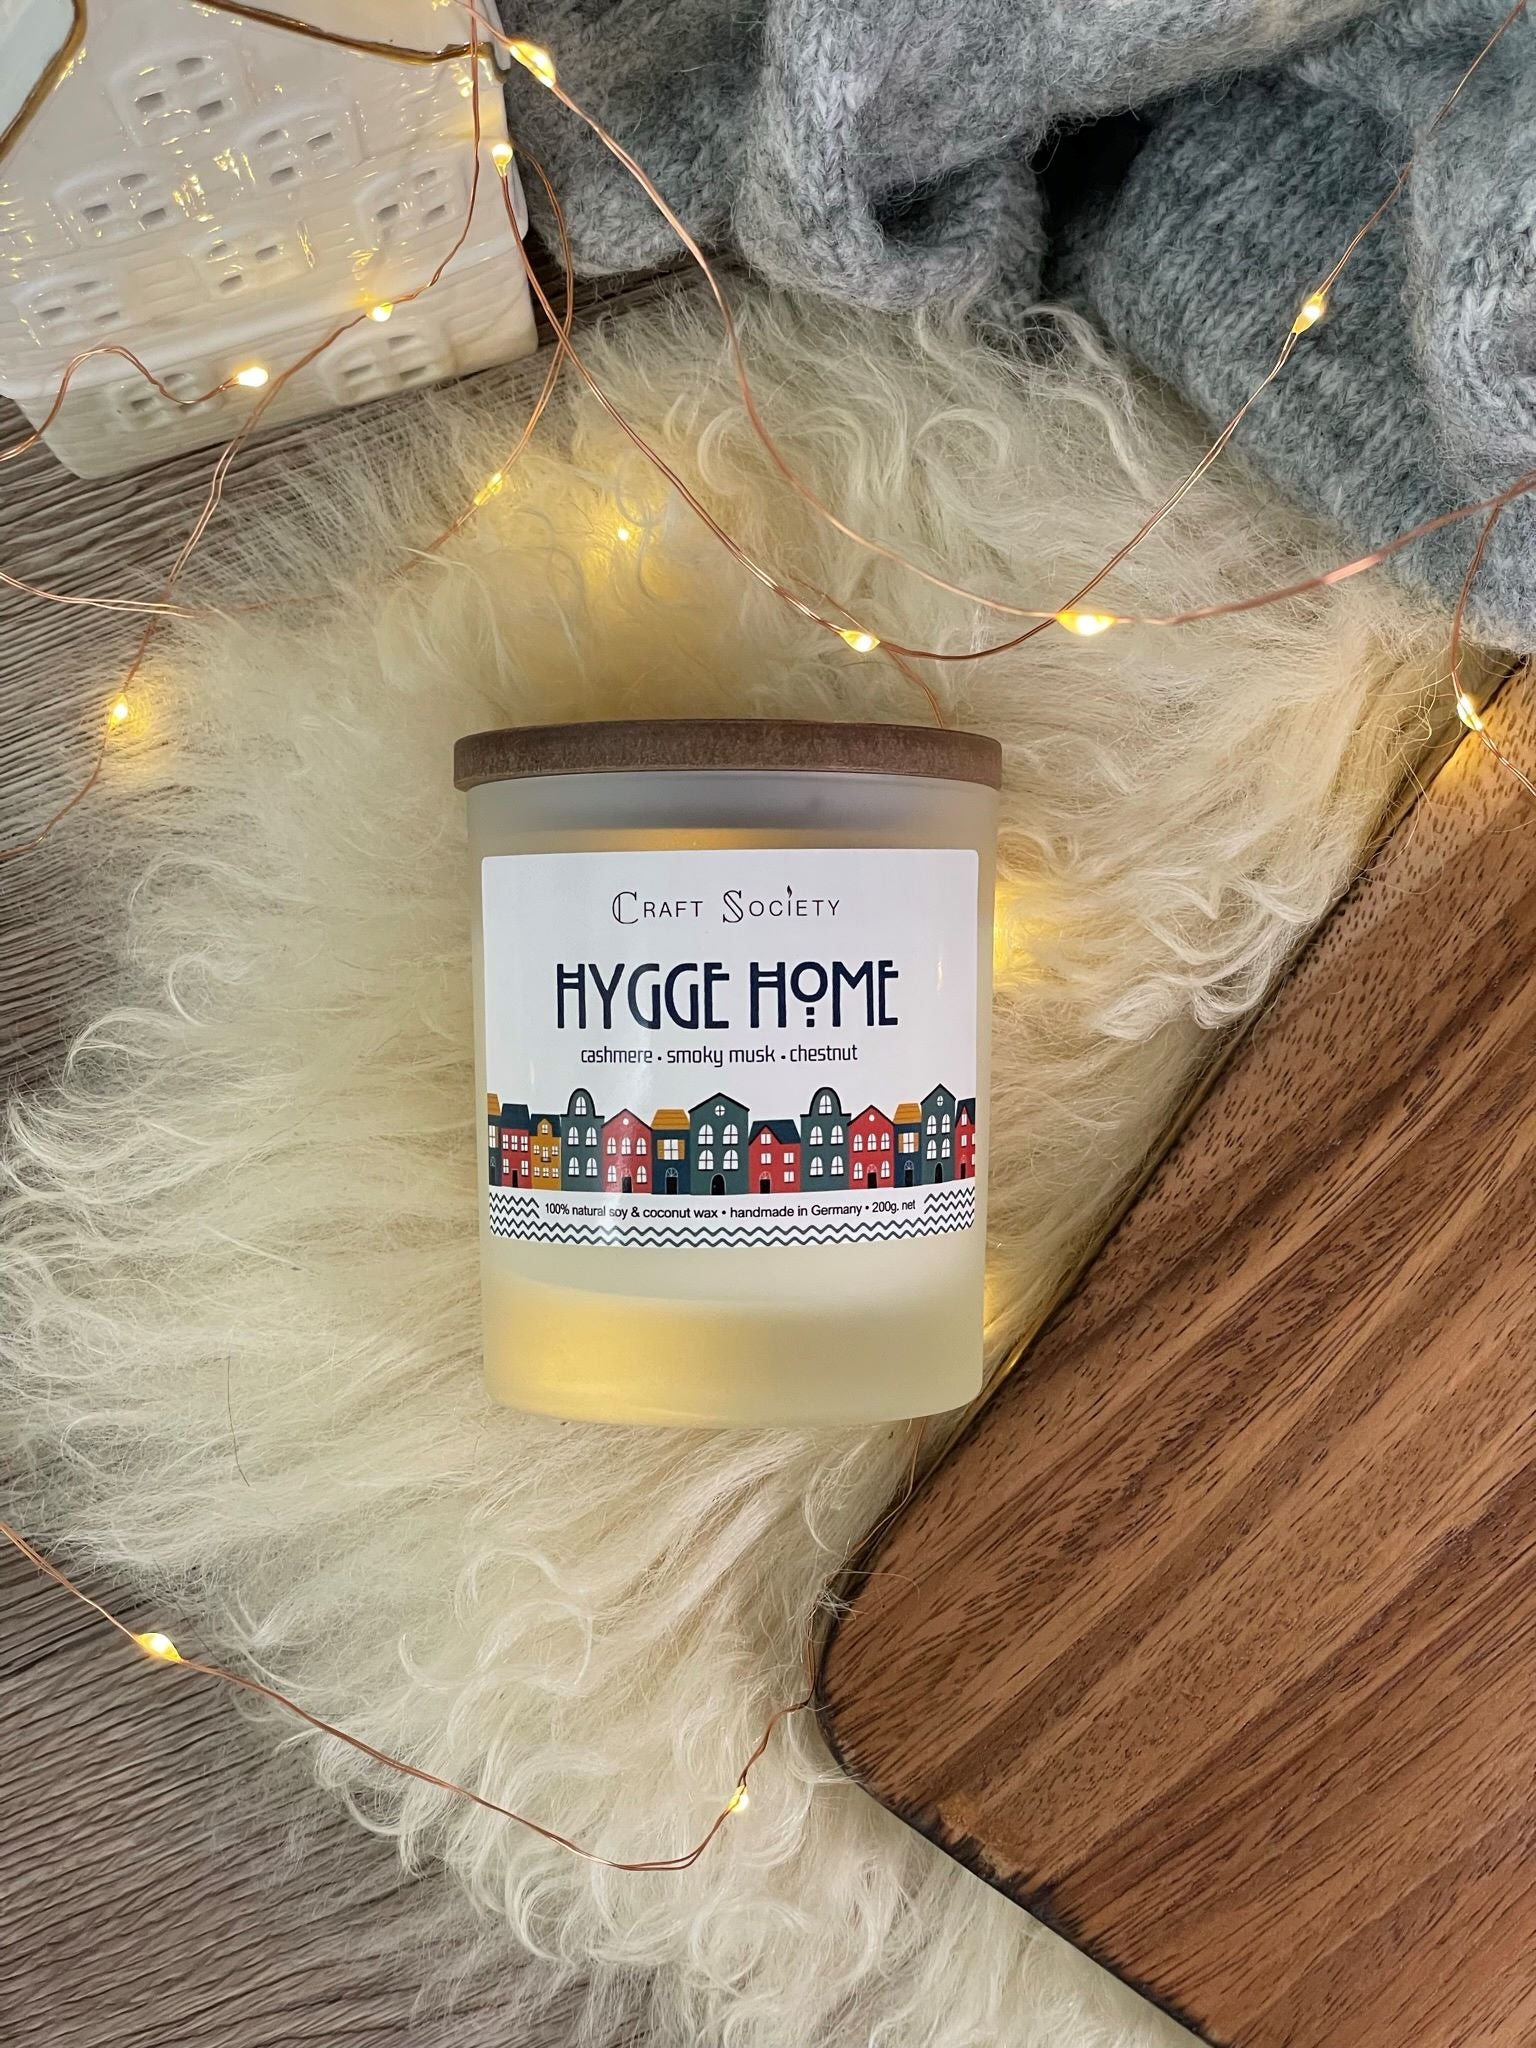 The Hygge Home scented candle with wooden wick from above on a festive background